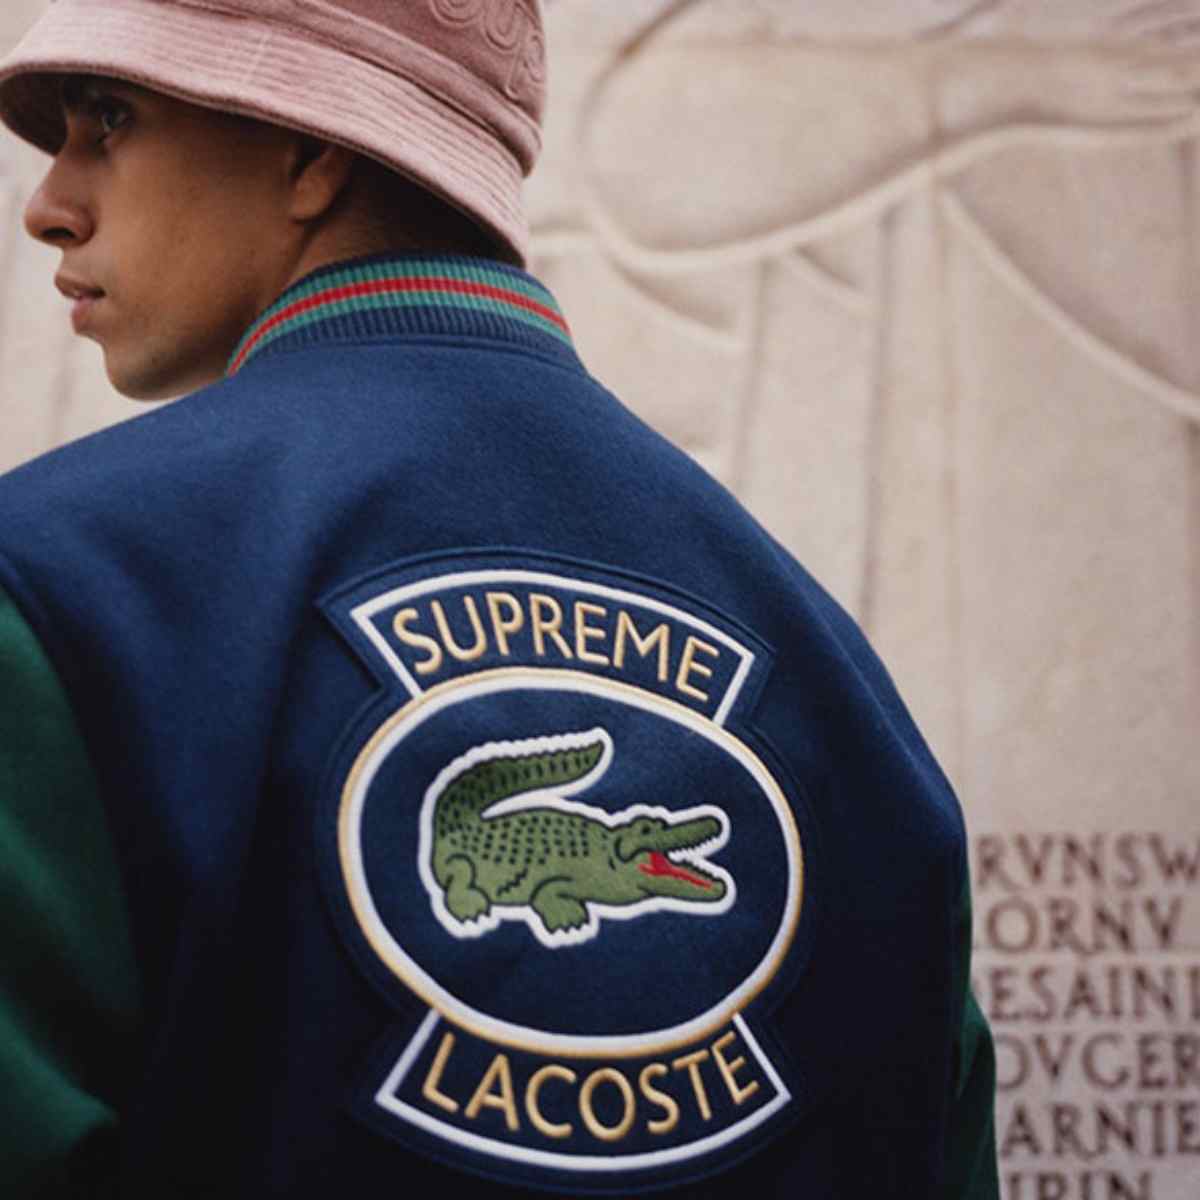 Why is Lacoste popular 